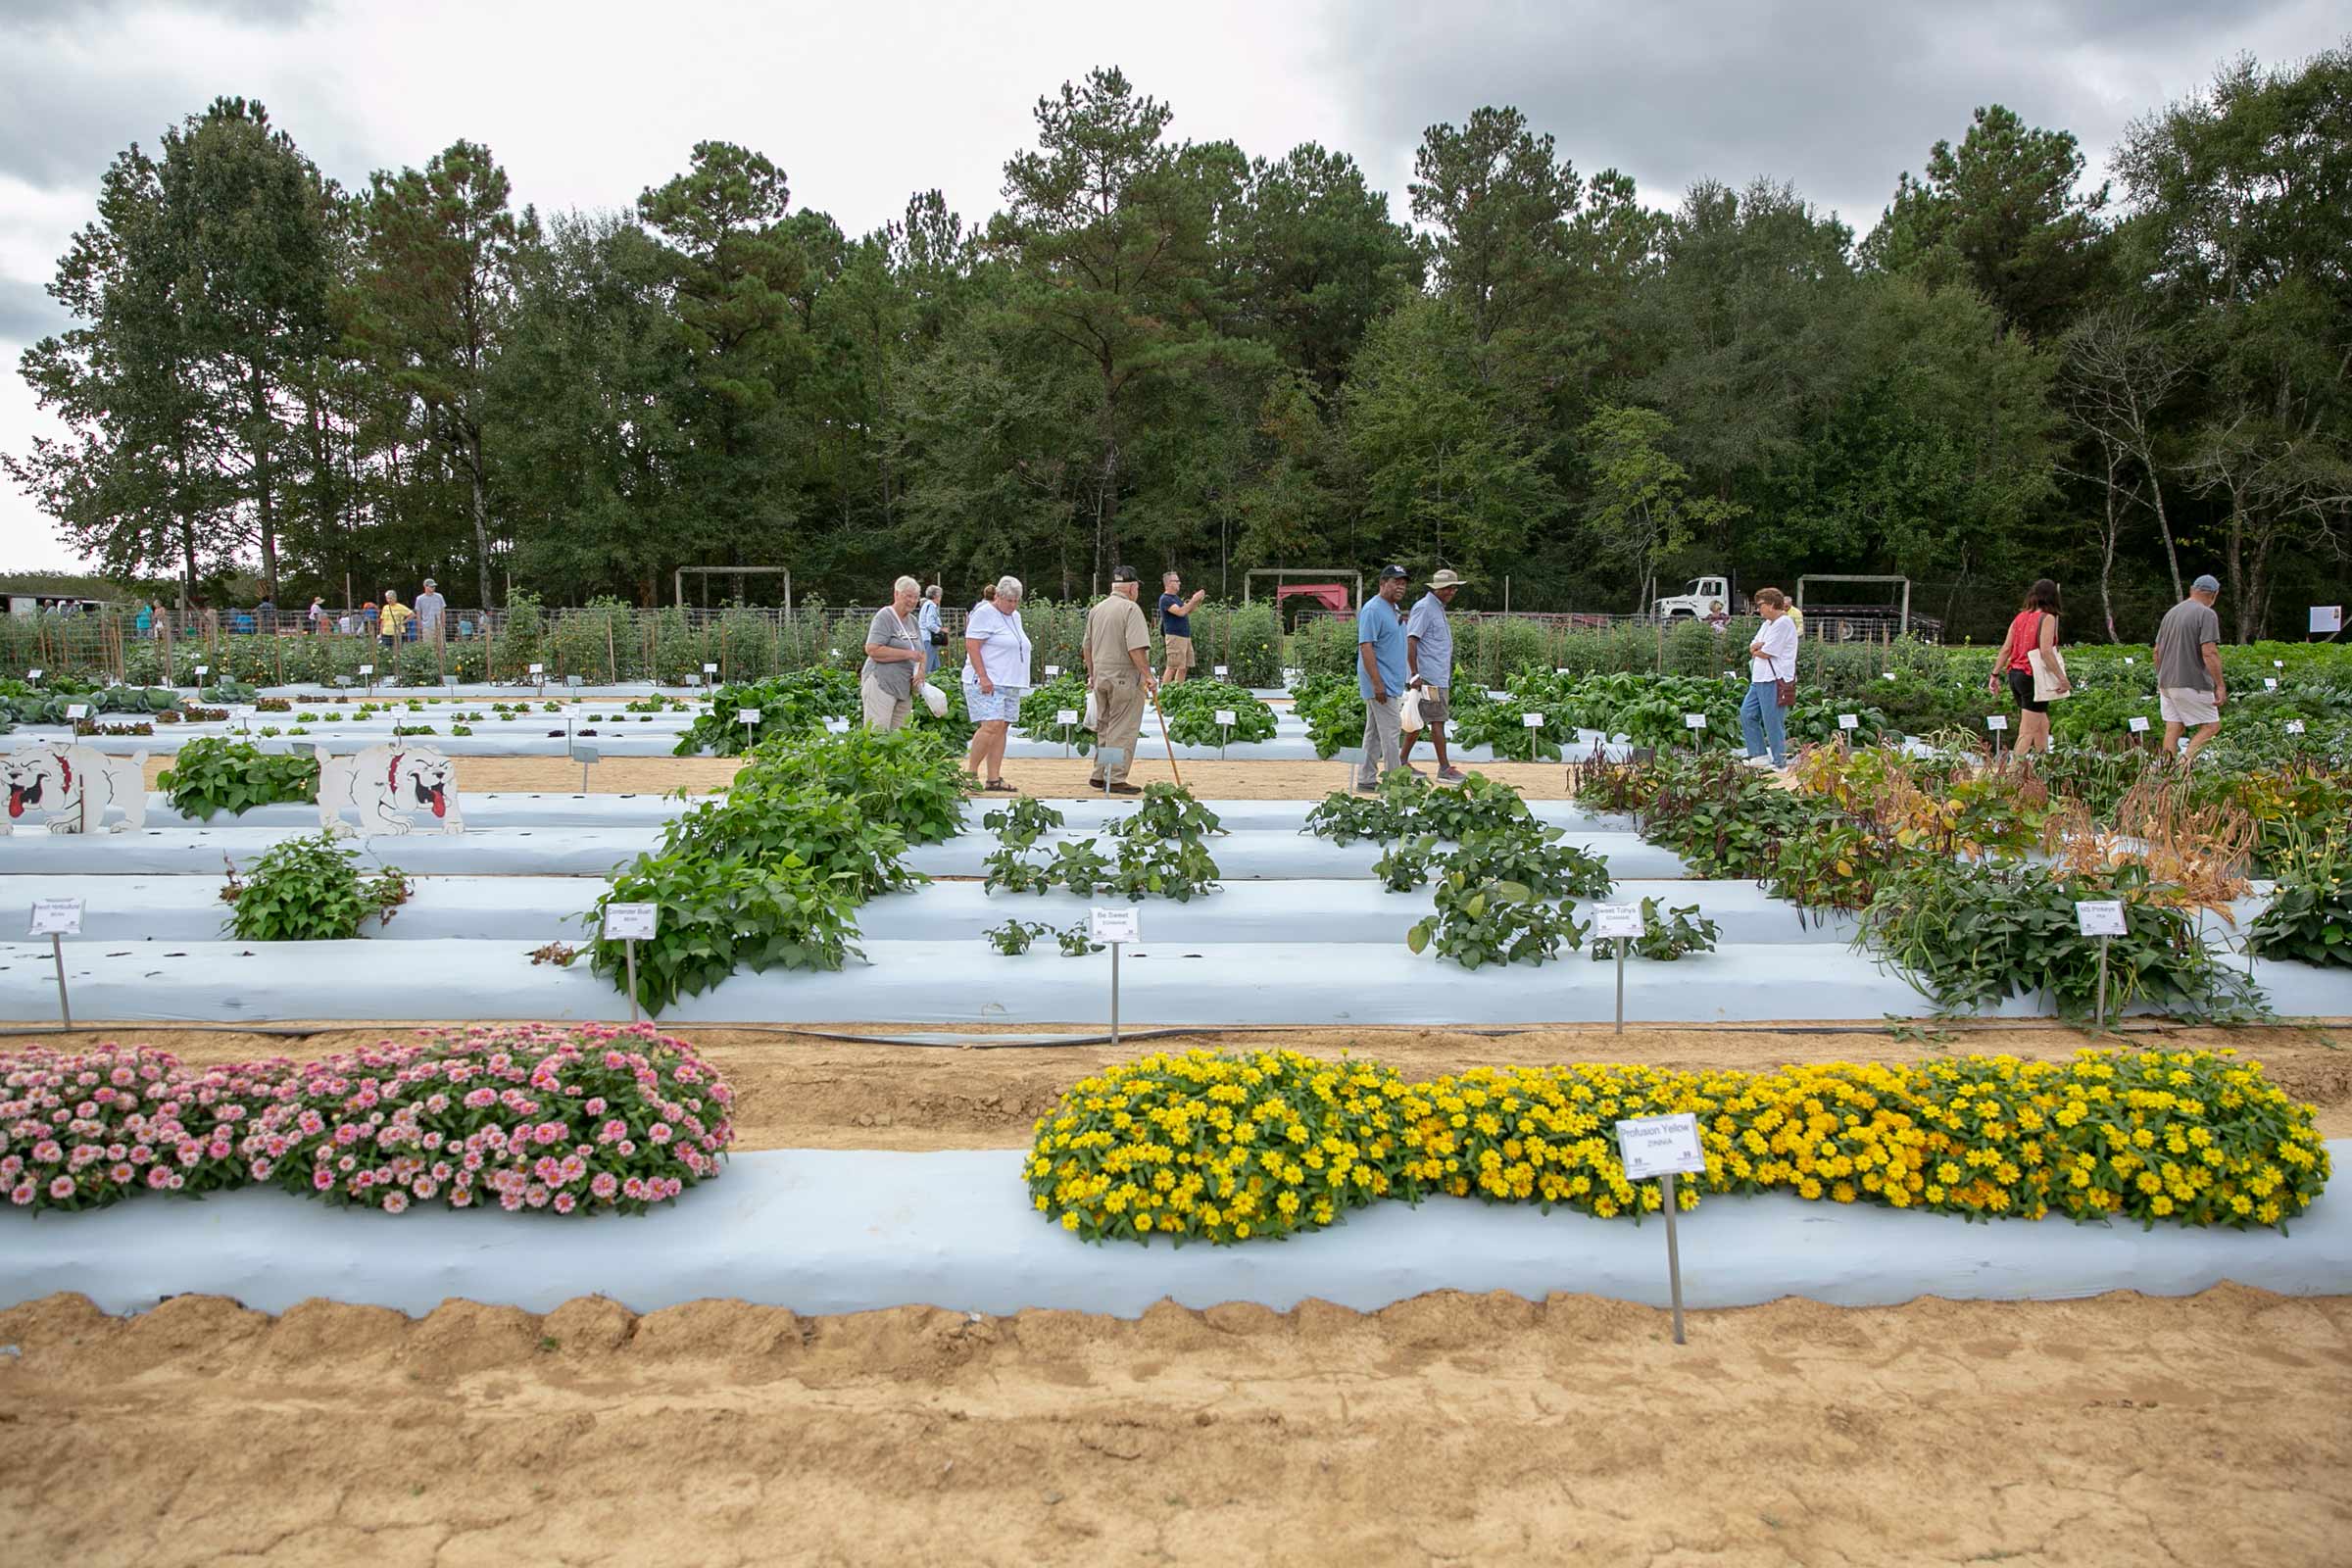 Visitors to the Flower and Gardne Fest walk between planted rows of plants.